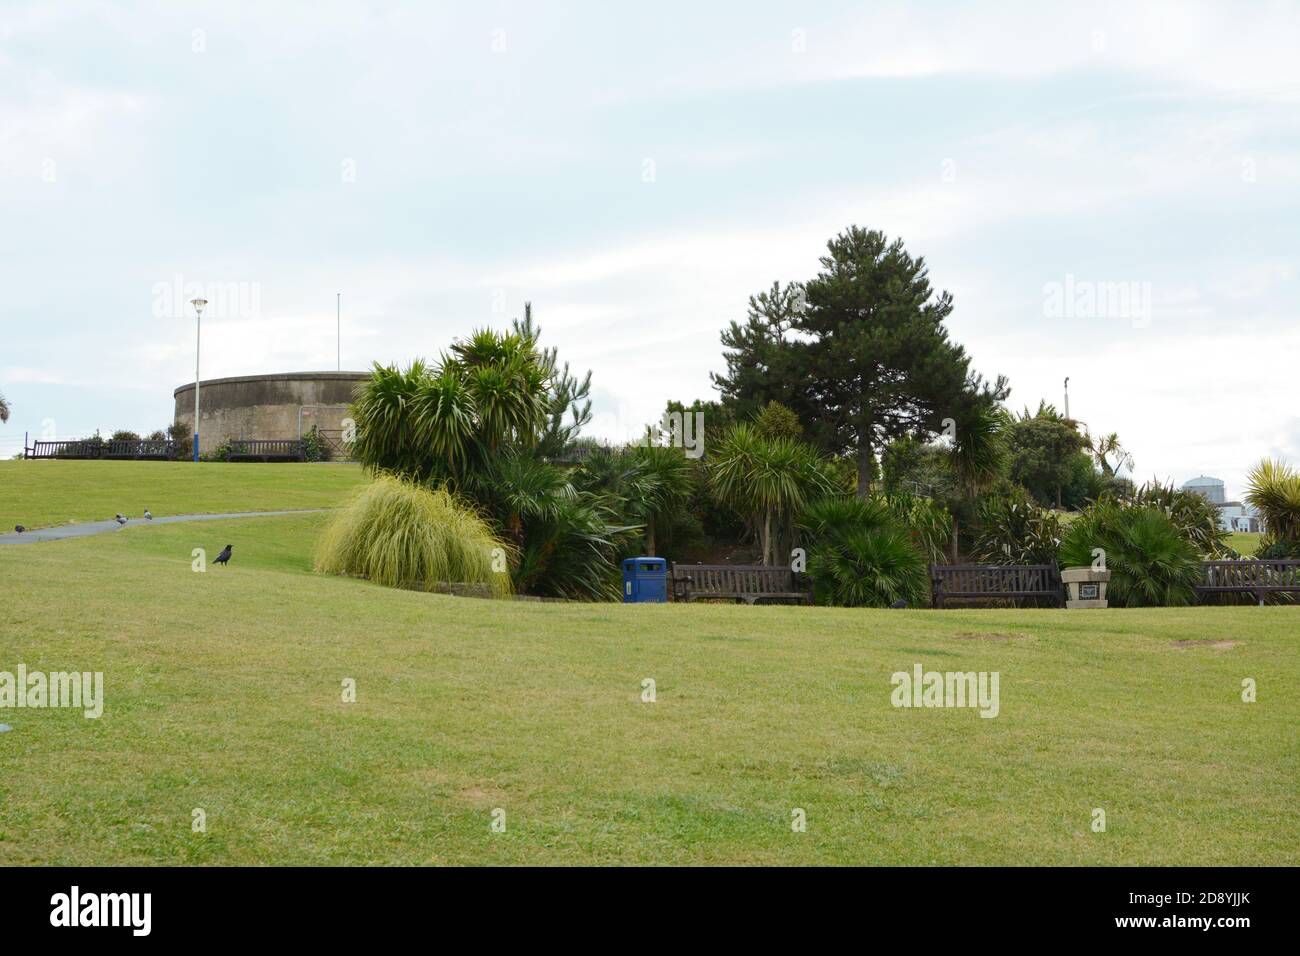 Grass slope with seating, shrubbery and trees in front of the historic Redoubt fortress on Royal Parade in Eastbourne Stock Photo